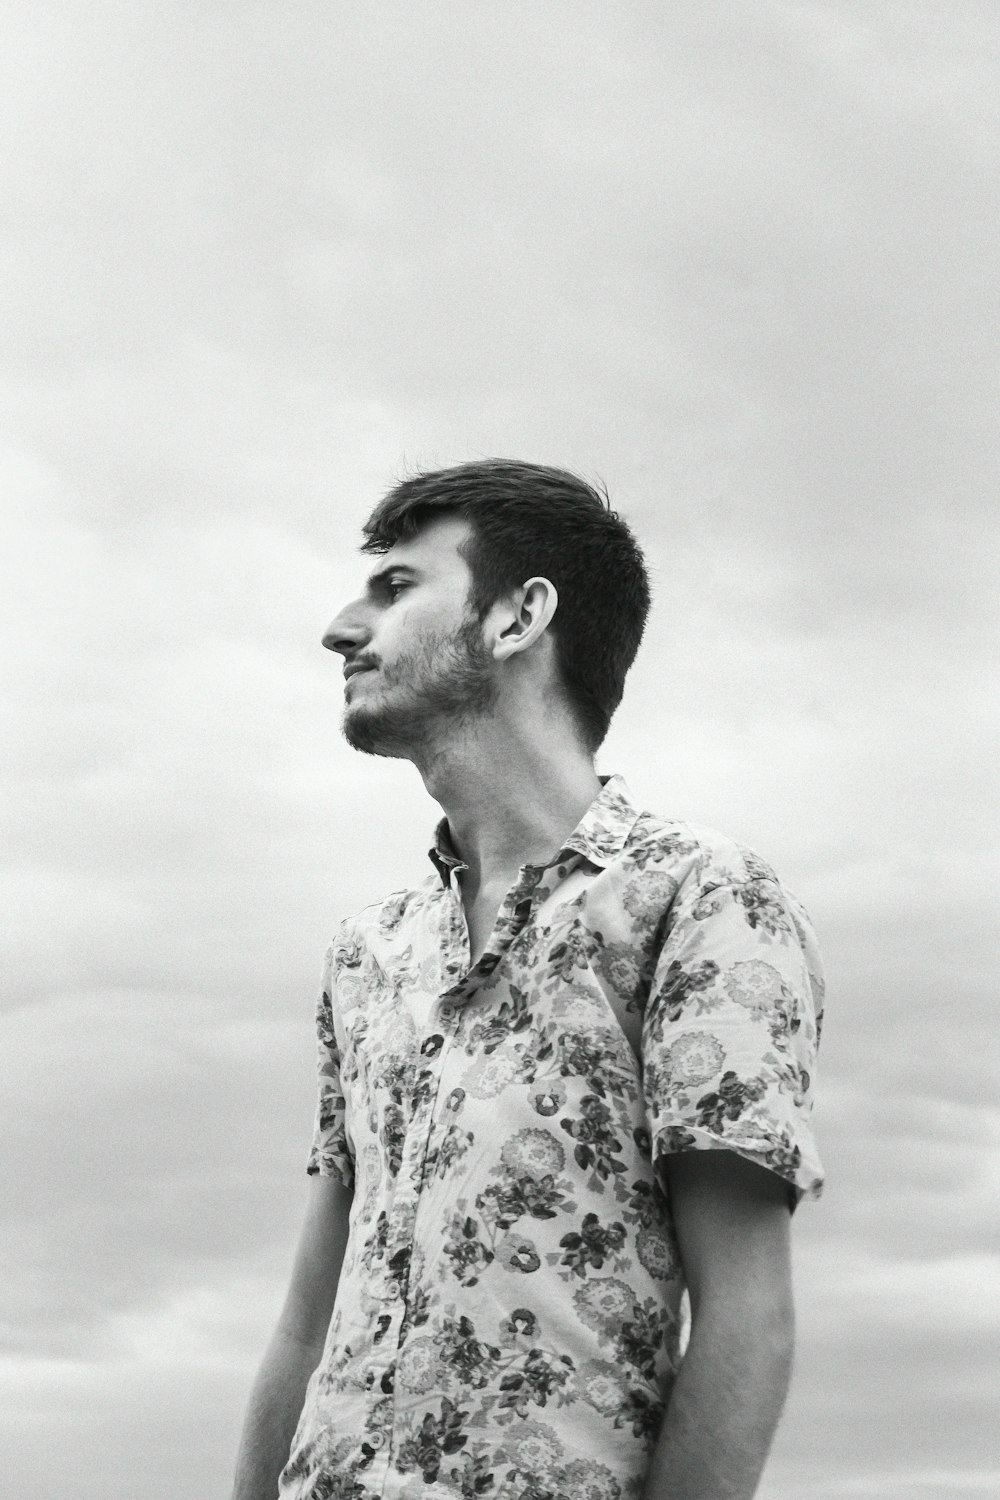 a man in a flowered shirt looks off into the distance